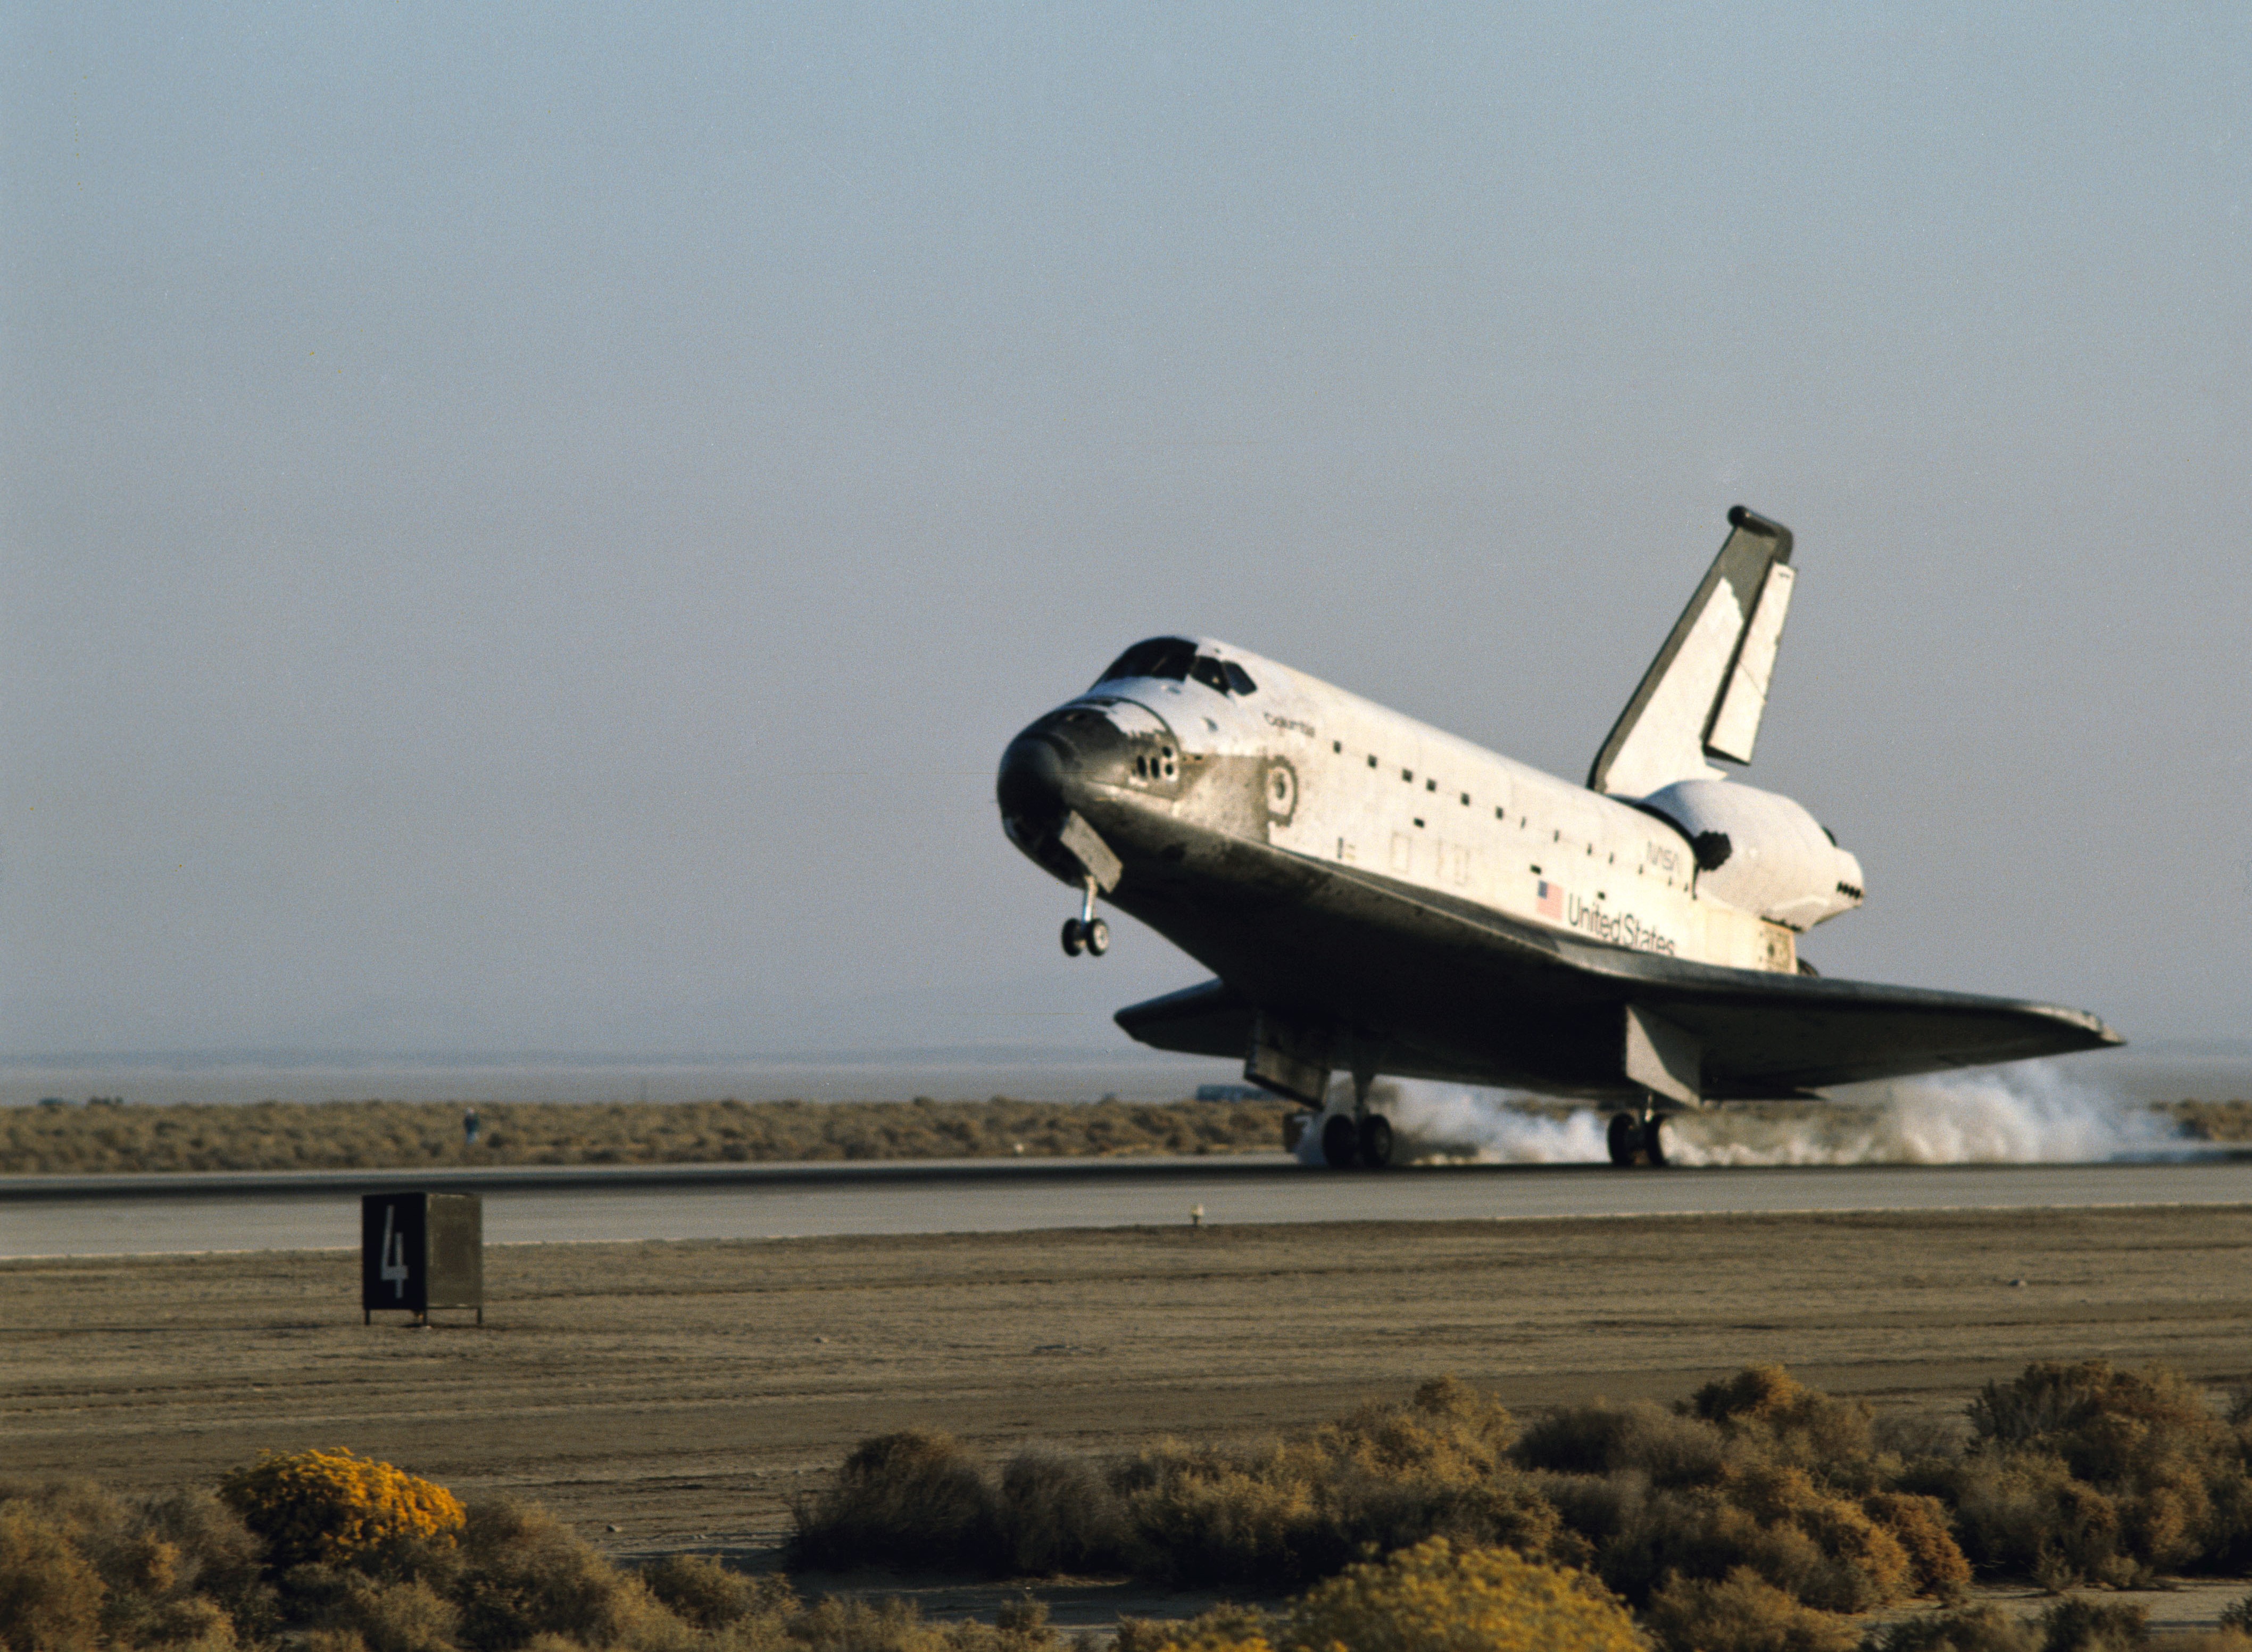 Space Shuttle Columbia lands at NASA’s Kennedy Space Center in Florida to end the 14-day STS-58 Spacelab Life Sciences 2 (SLS-2) mission